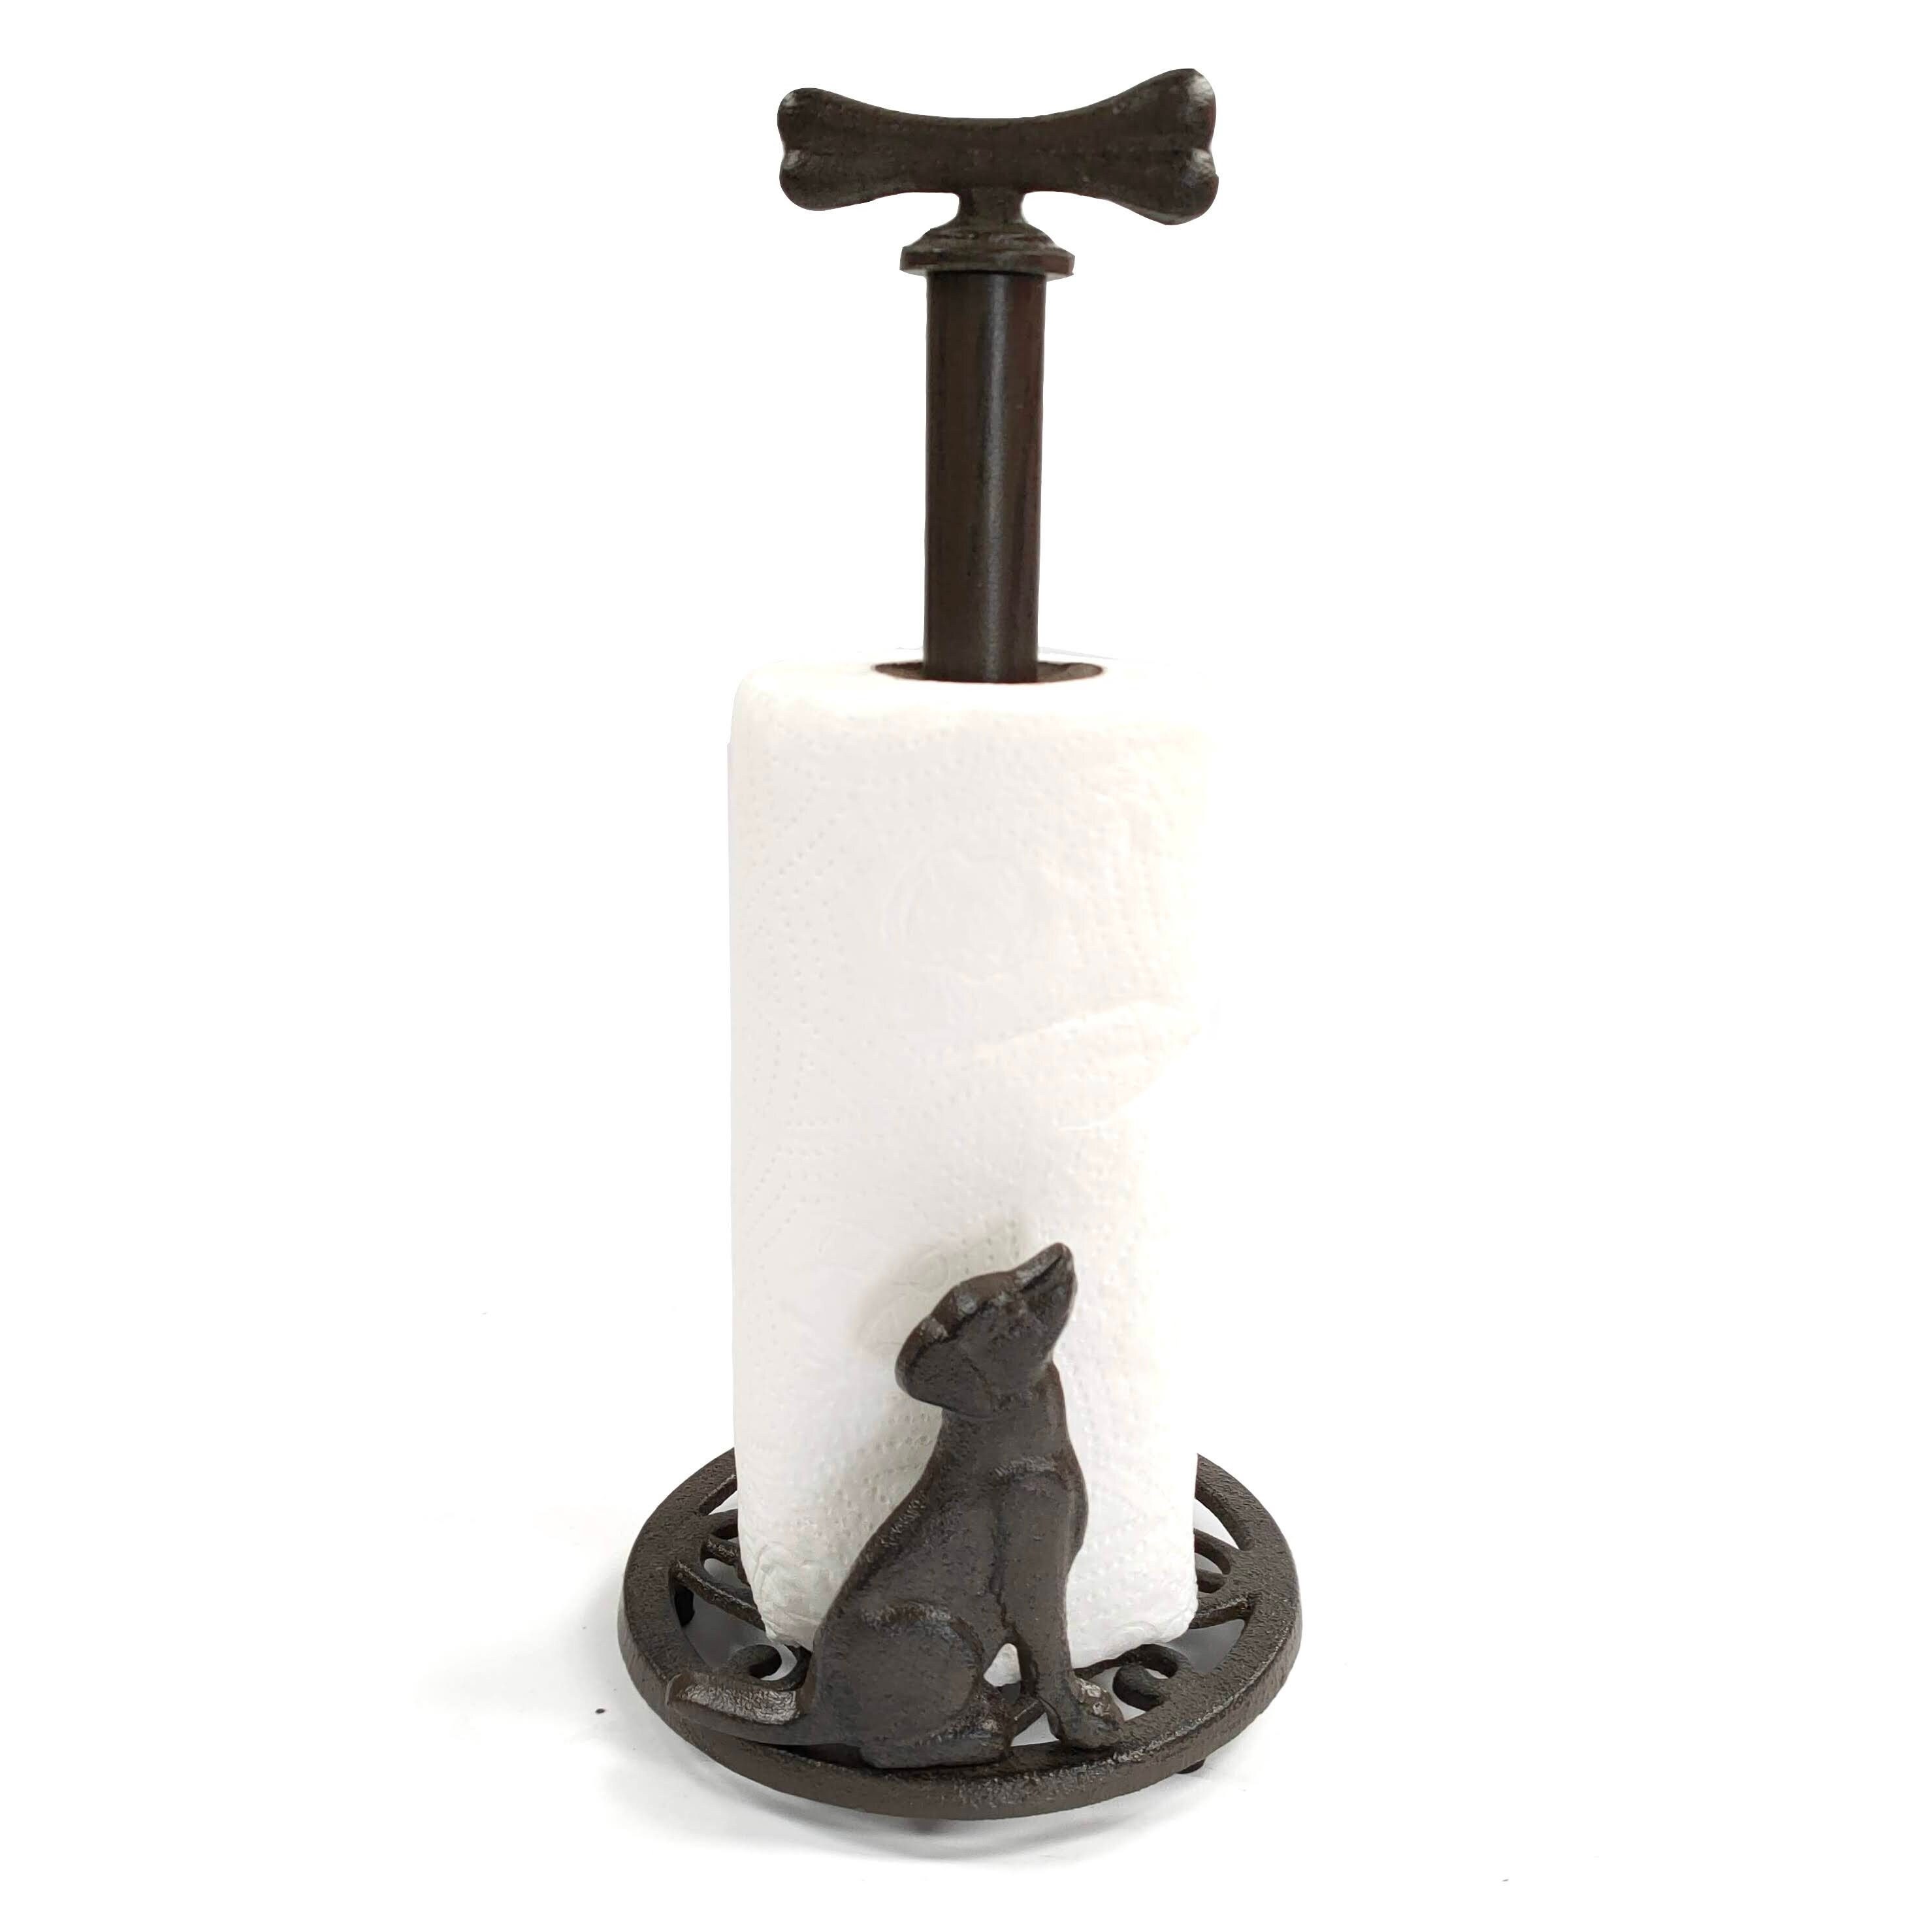 BEAUTIFUL HANDWROUGHT IRON SPIRAL TOILET ROLL HOLDER WALL MOUNTED TISSUE RACK by Bowley & Jackson 